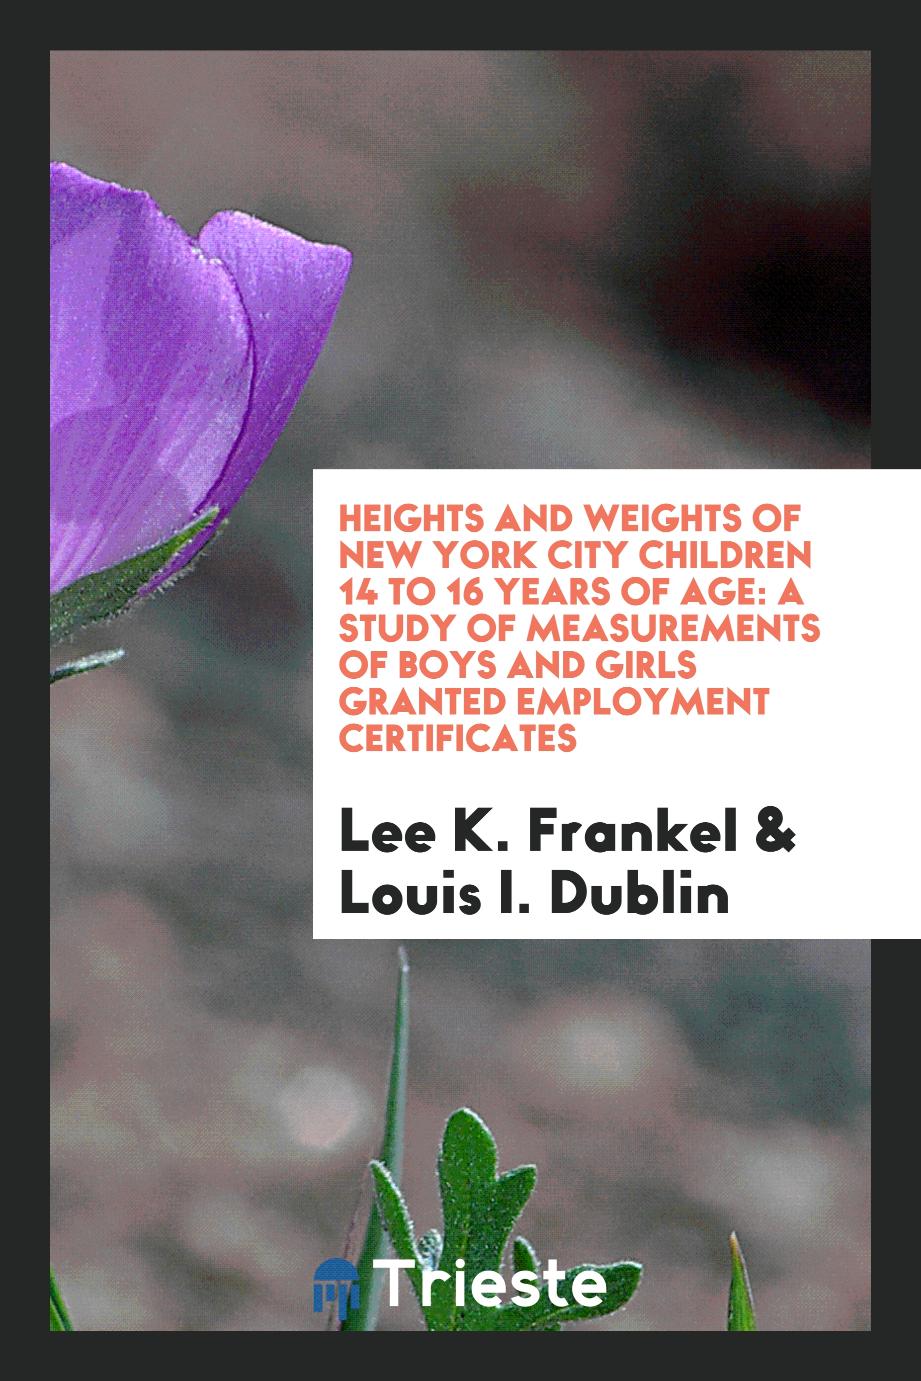 Heights and Weights of New York City Children 14 to 16 Years of Age: A Study of Measurements of Boys and Girls Granted Employment Certificates